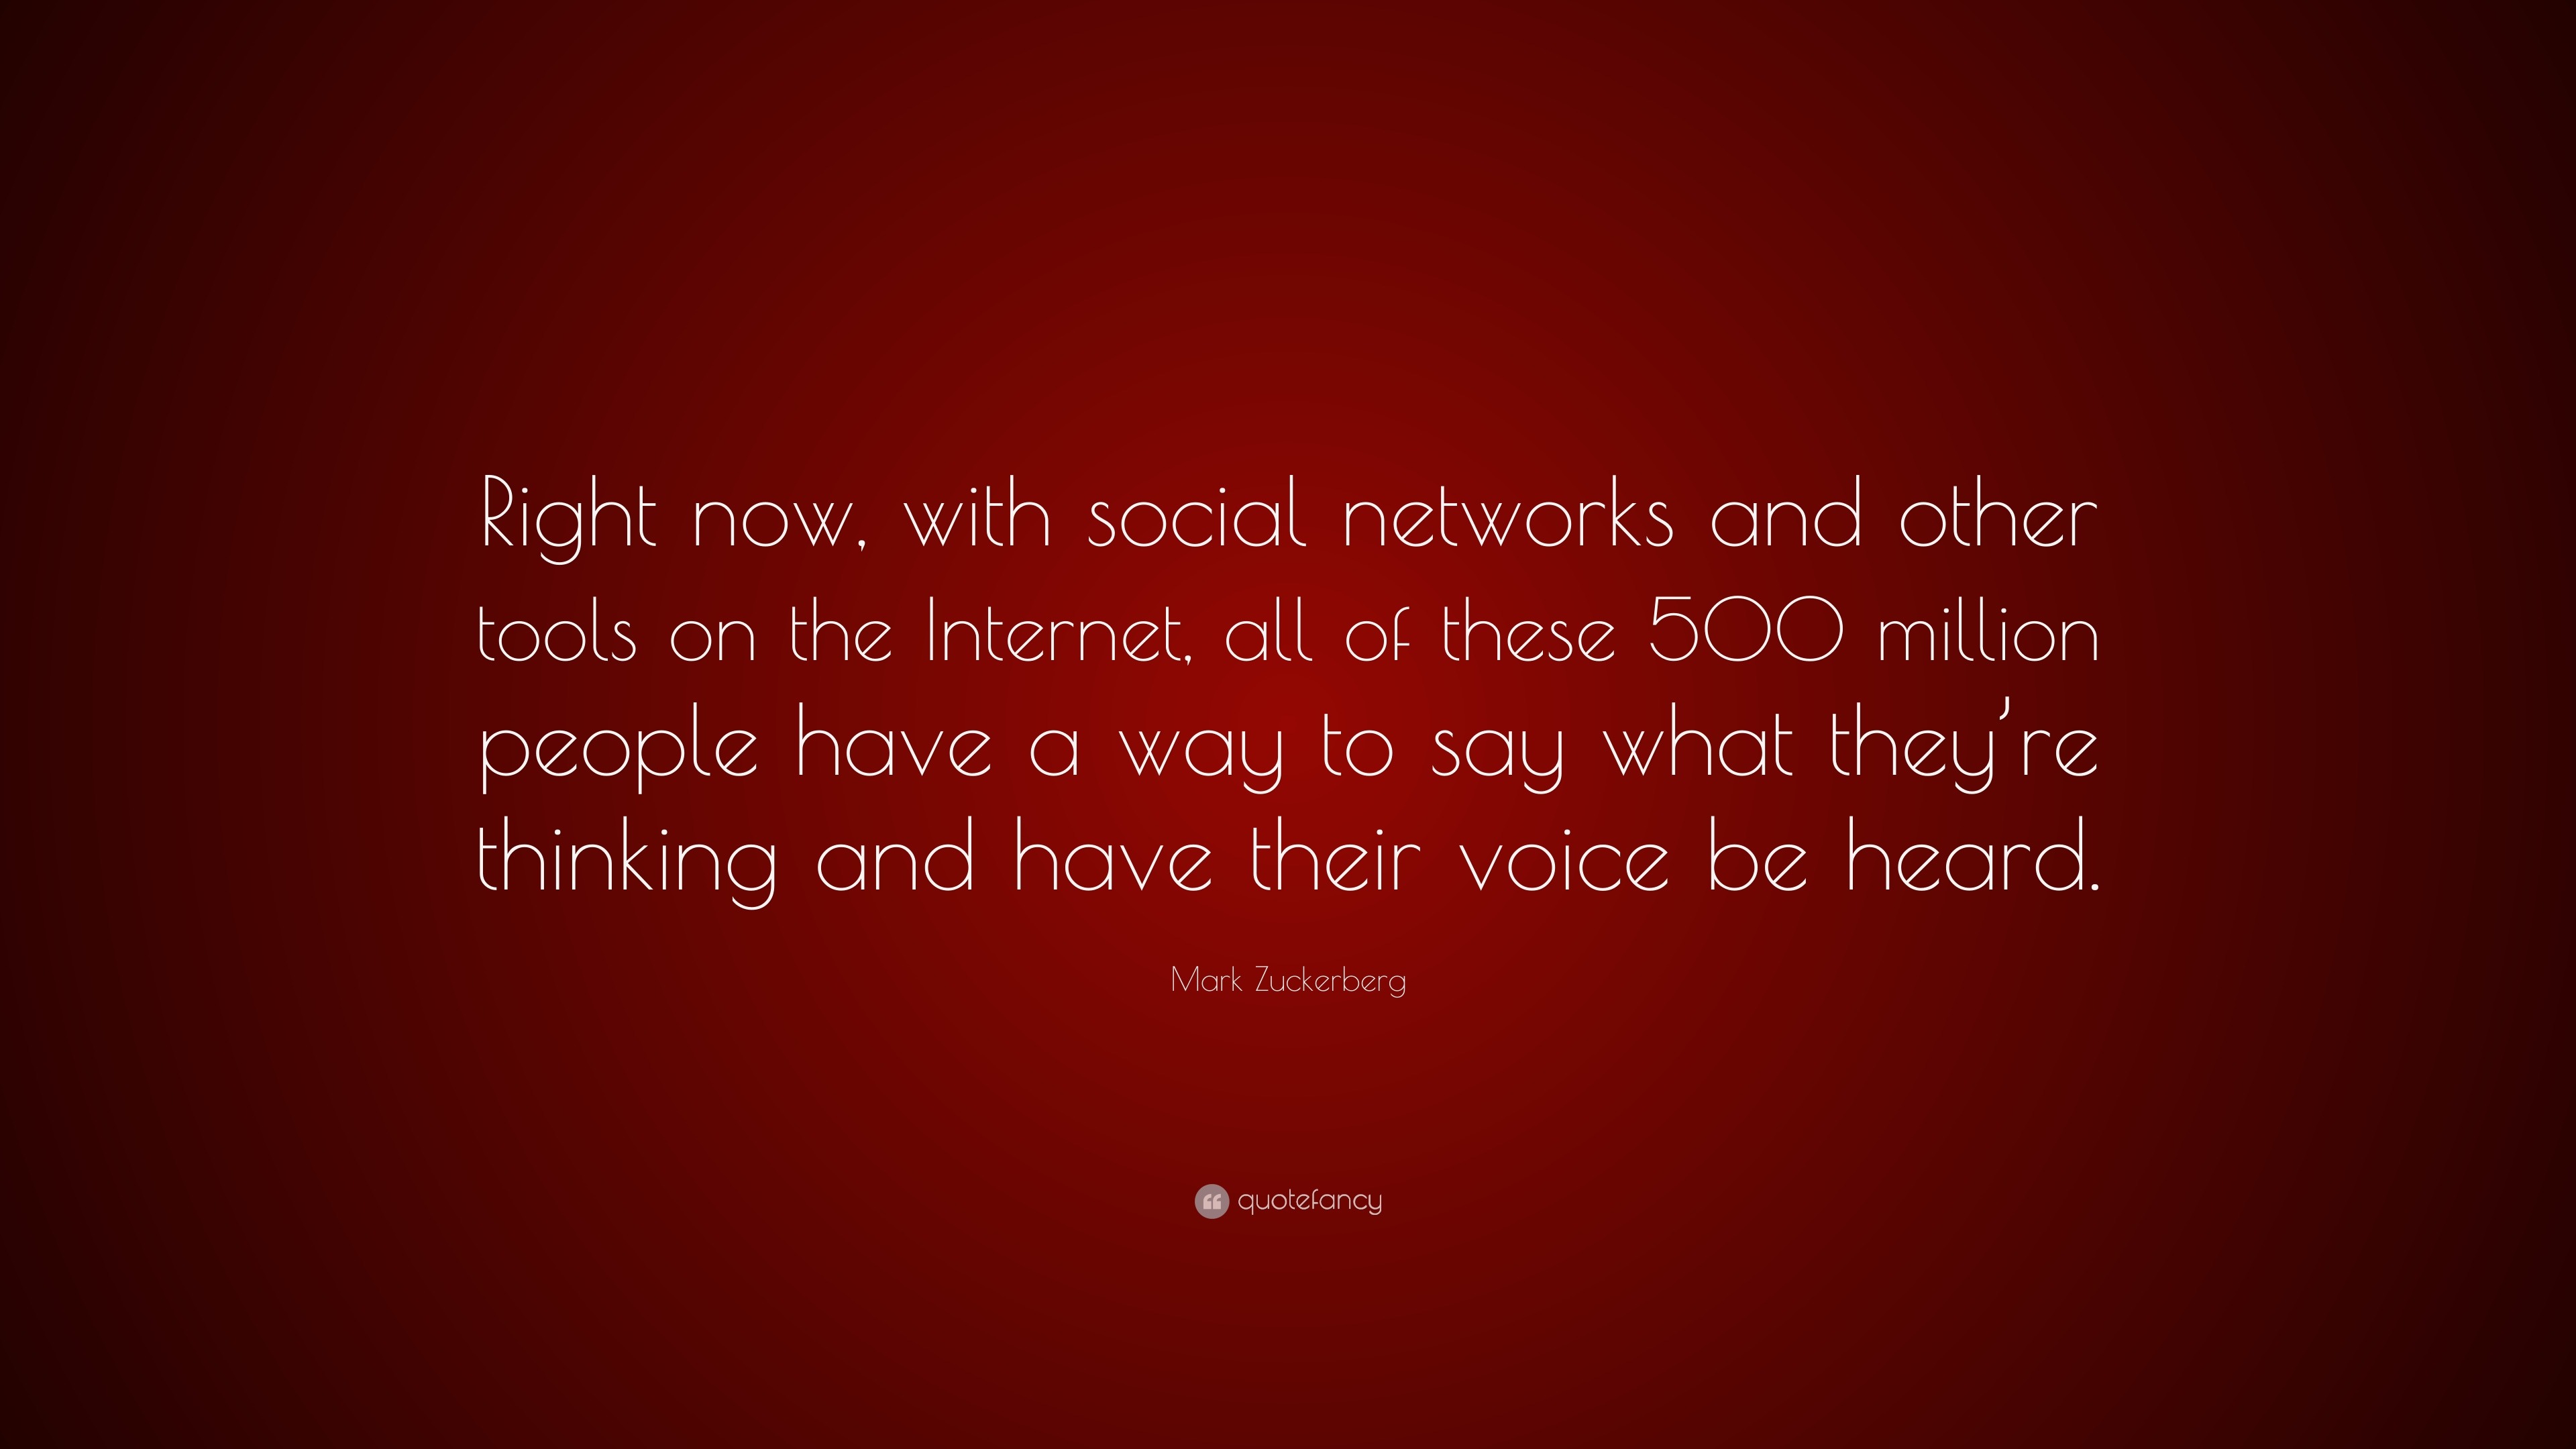 Mark Zuckerberg Quote: “Right now, with social networks and other tools ...